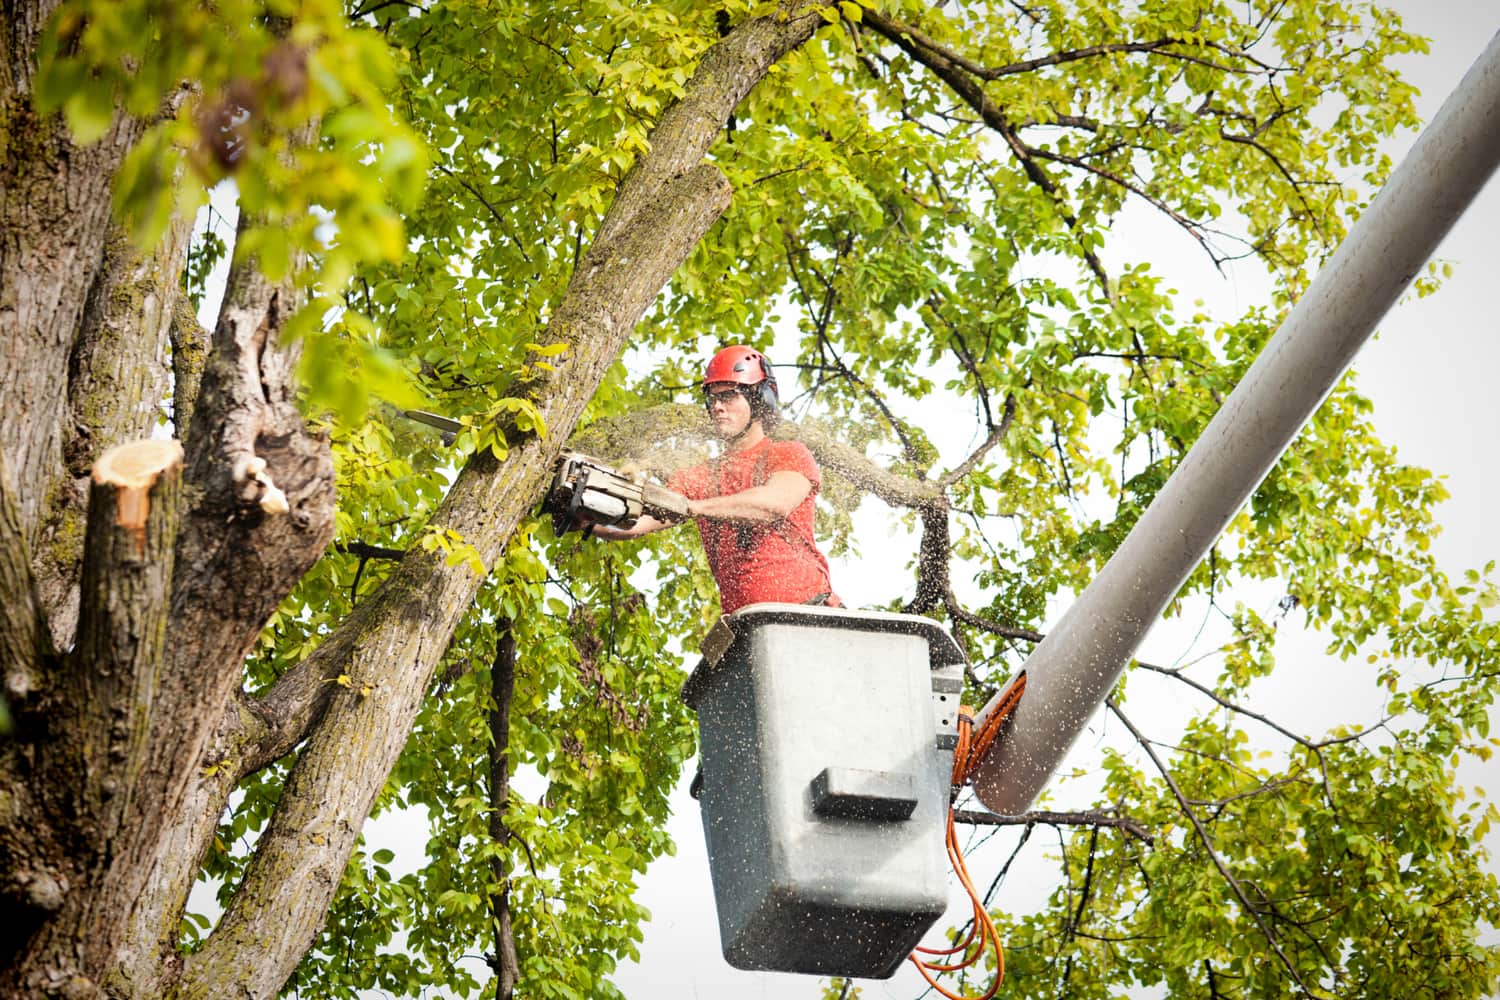 Real Tree Trimming & Landscaping, Inc. - Pompano Beach, FL, US, tree service near me
